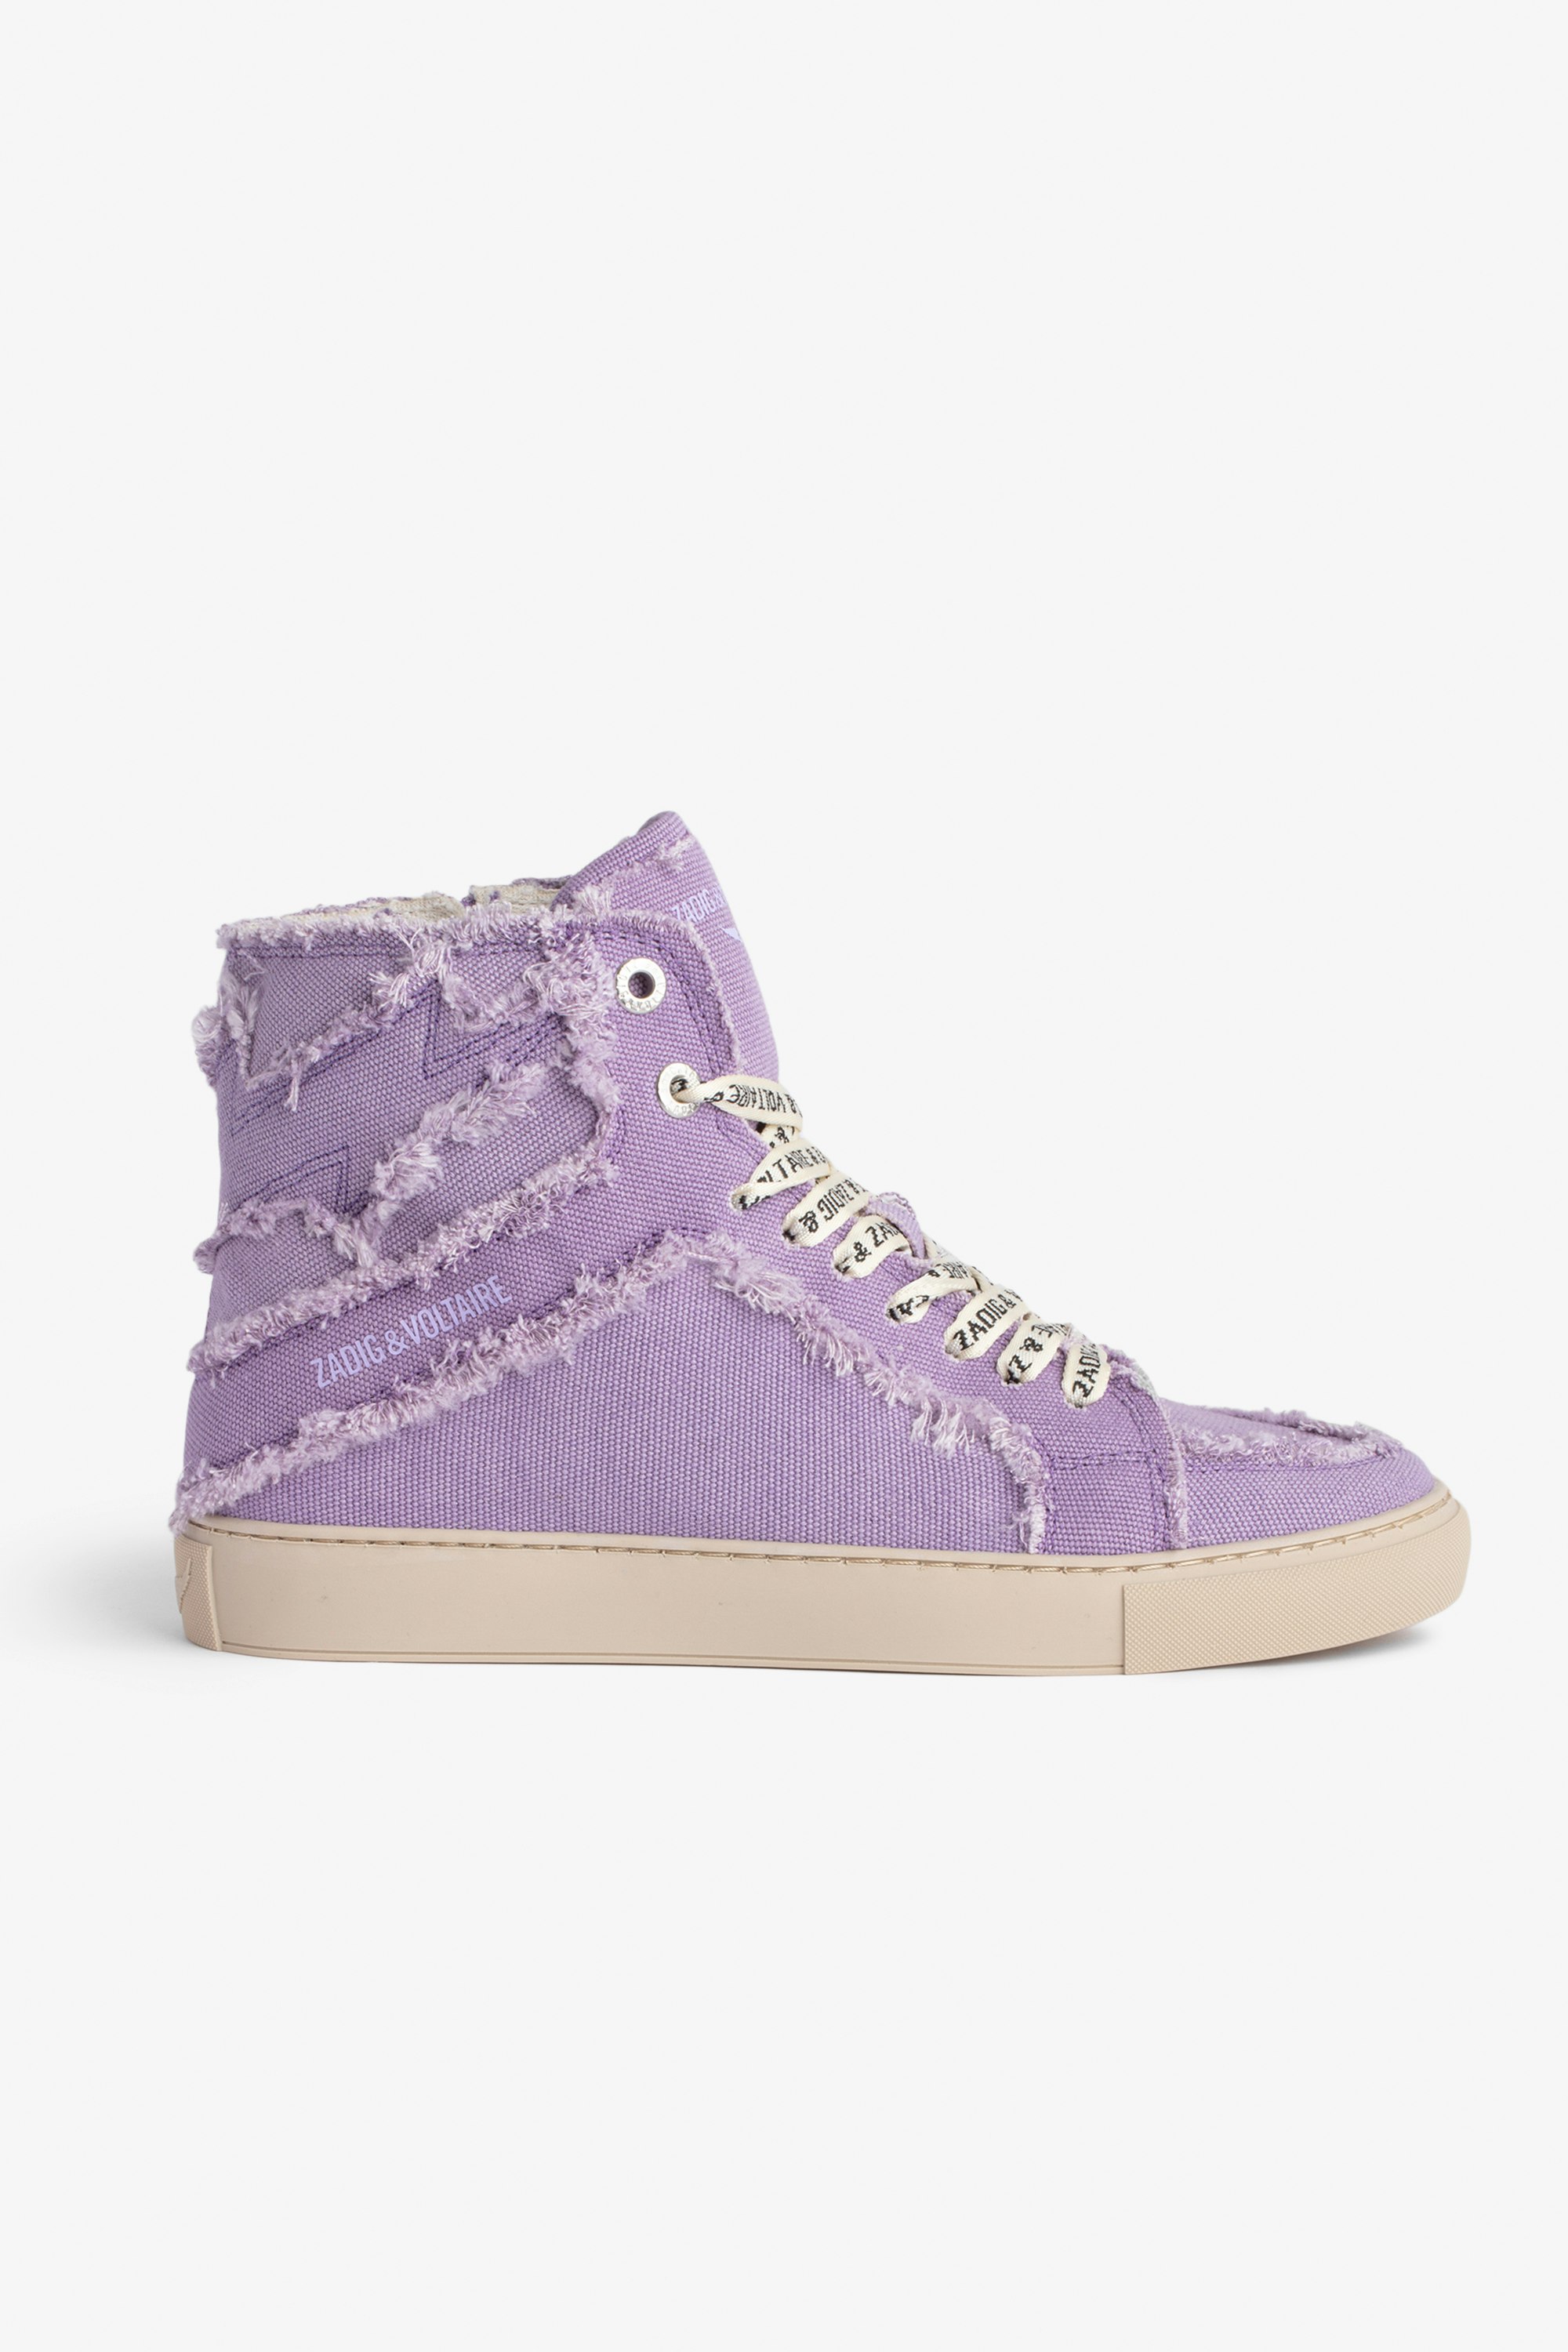 ZV1747 High Flash High-Top Trainers Women's high-top trainers in purple cotton canvas